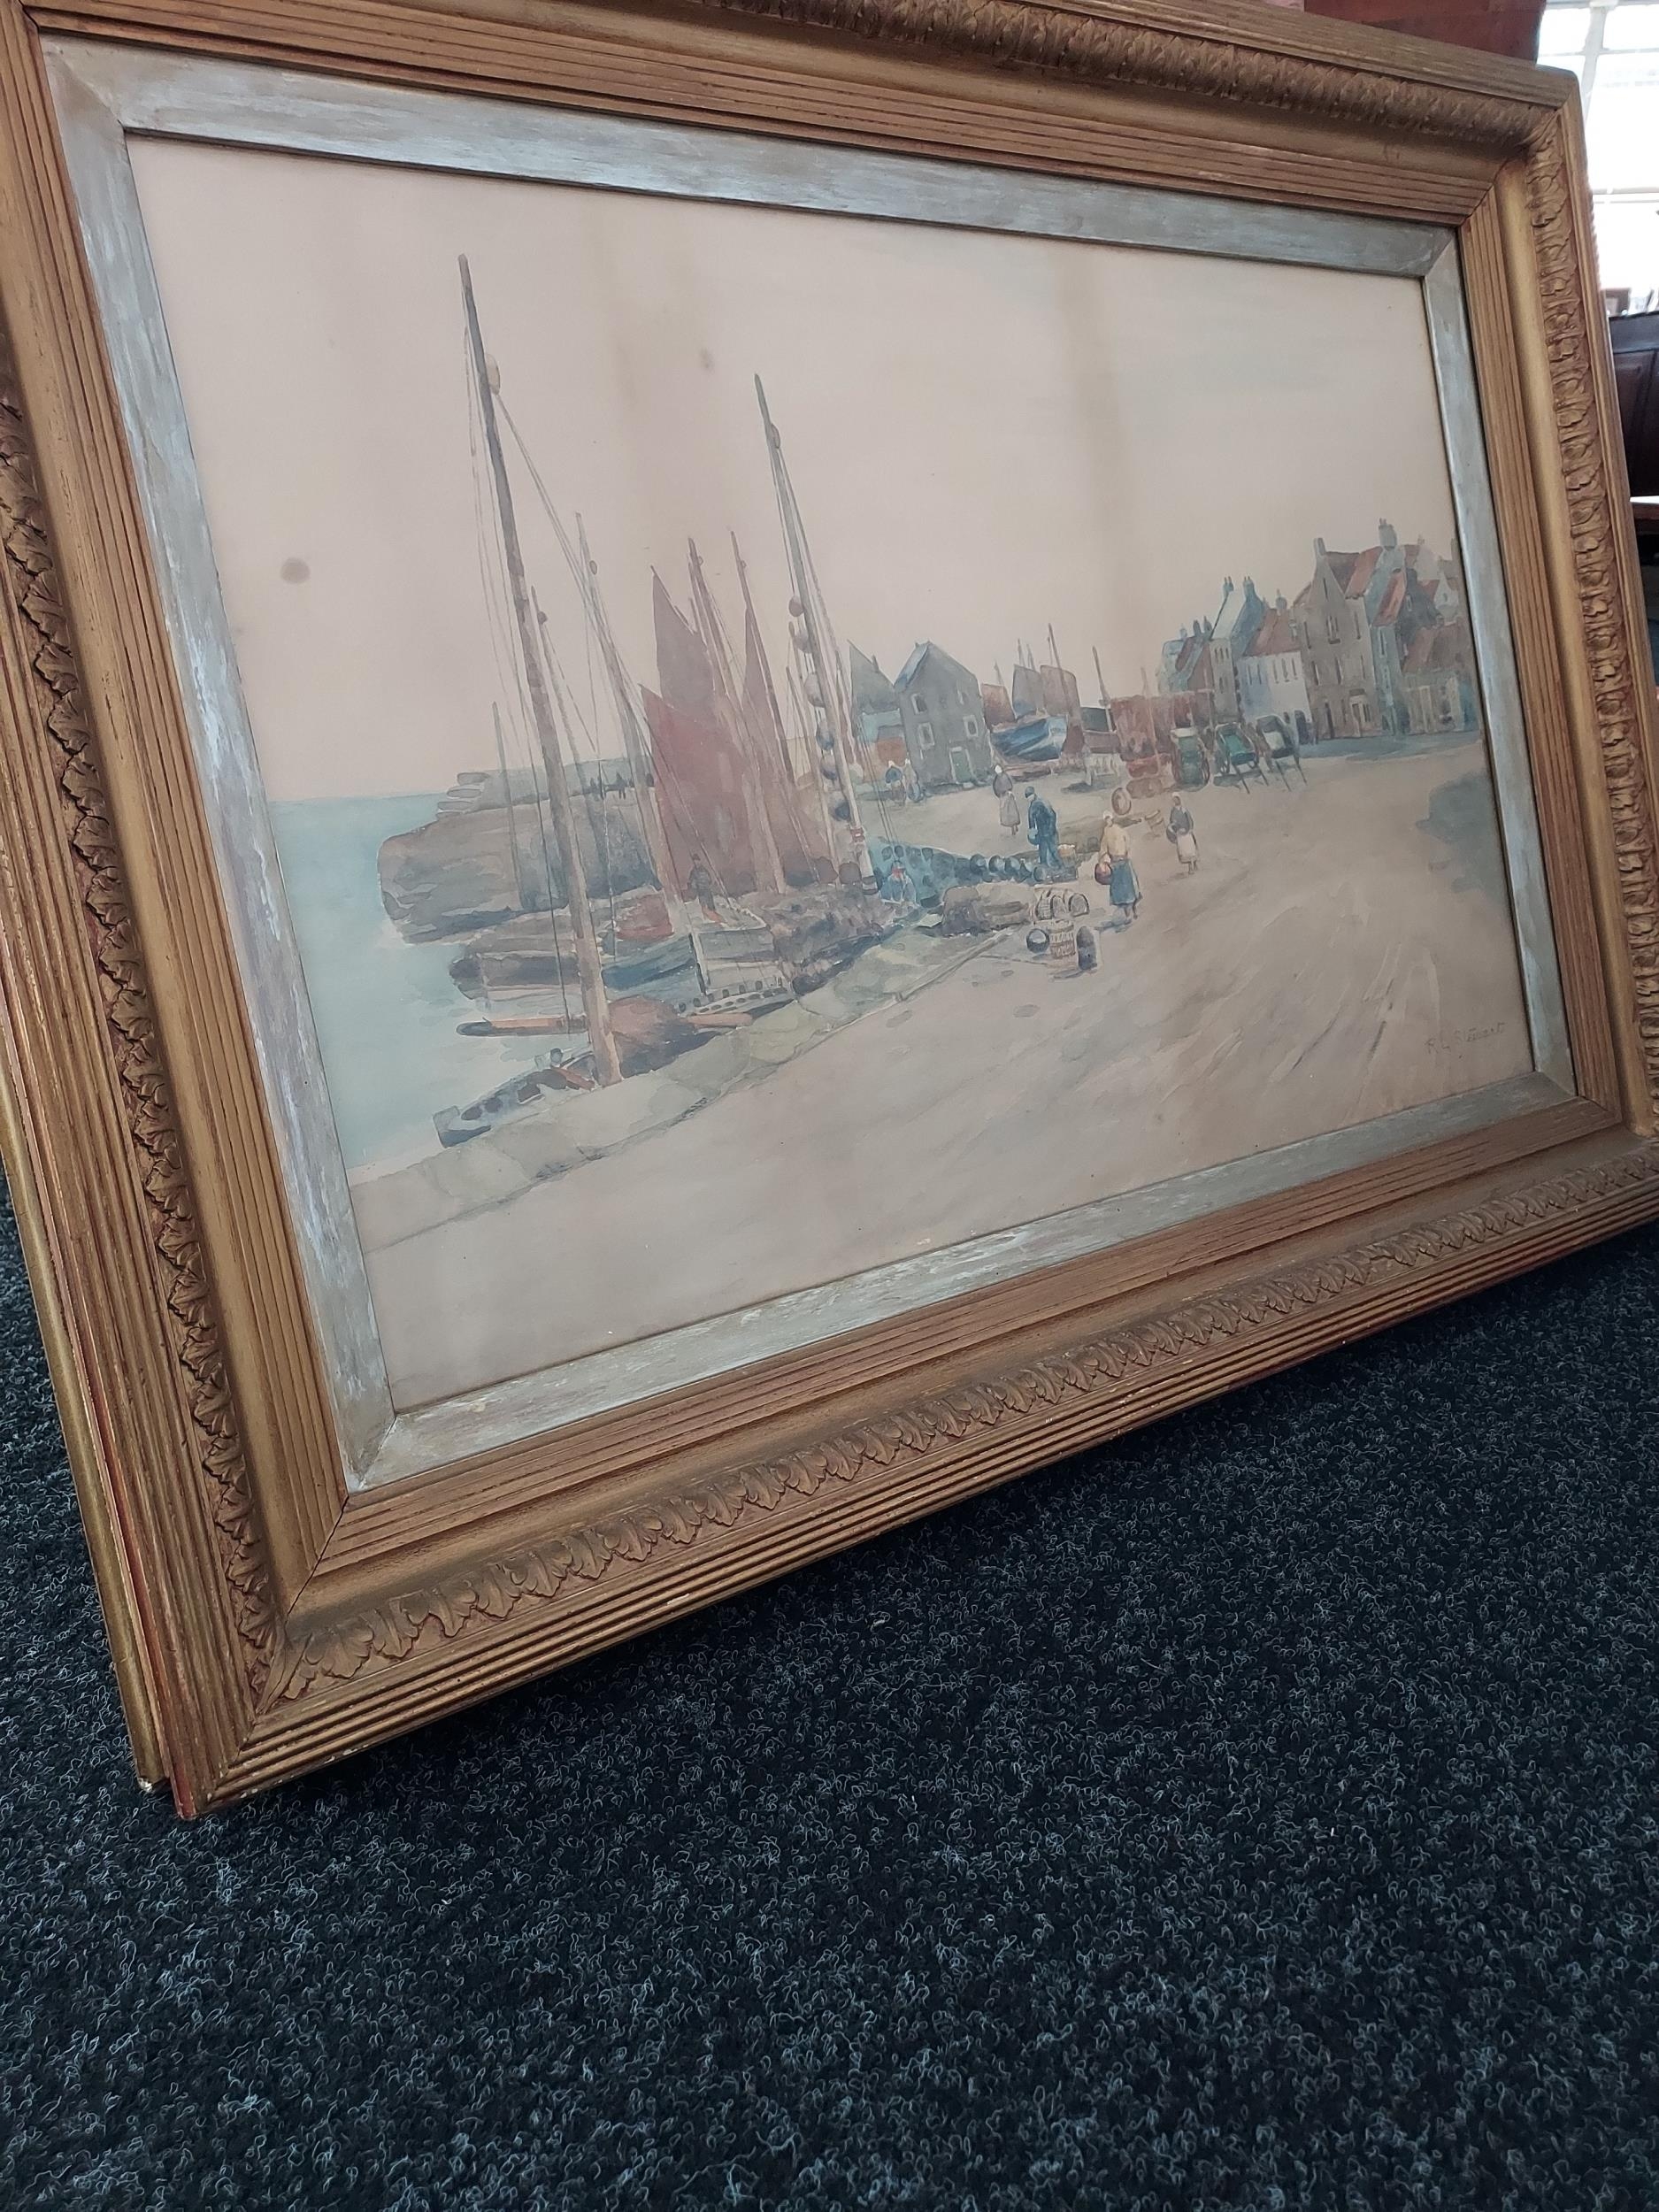 R.L. STEWART (British 19th century) Original watercolour depicting Pittenweem Harbour. Fitted within